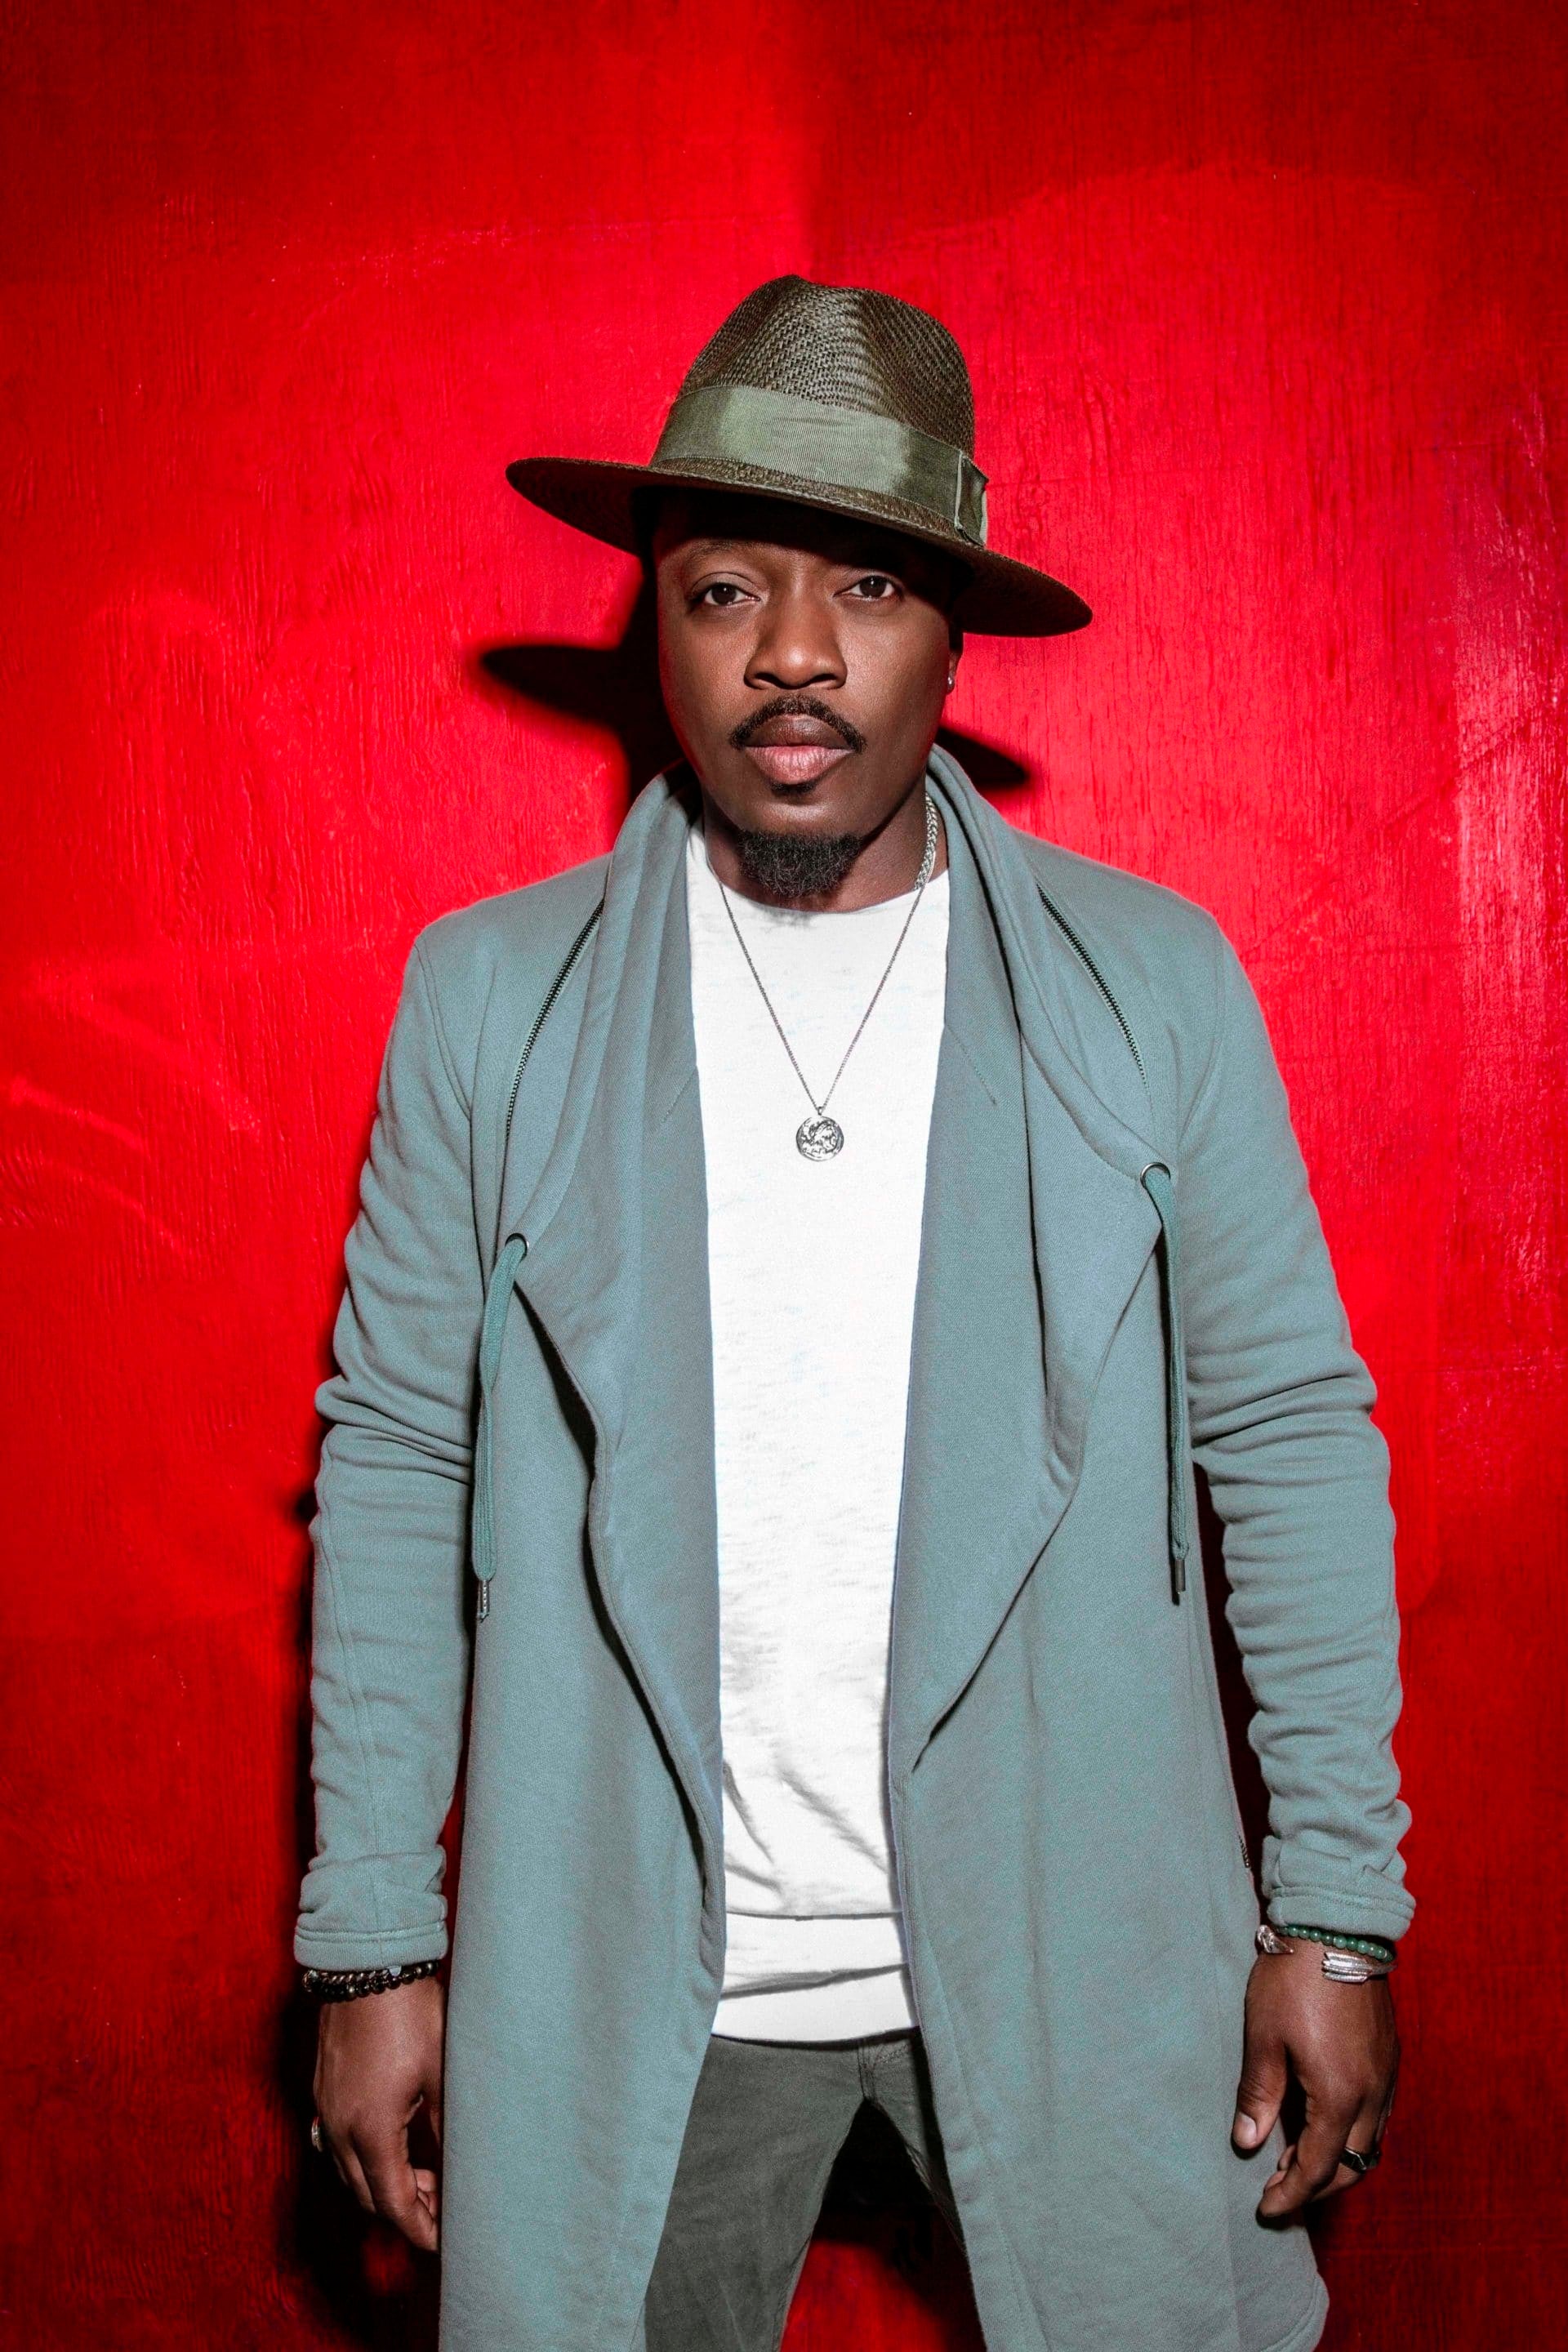 EXCLUSIVE PREMIERE: Anthony Hamilton Reaches Out To Voters With Powerful New Music Video For 'Love Conquers All'